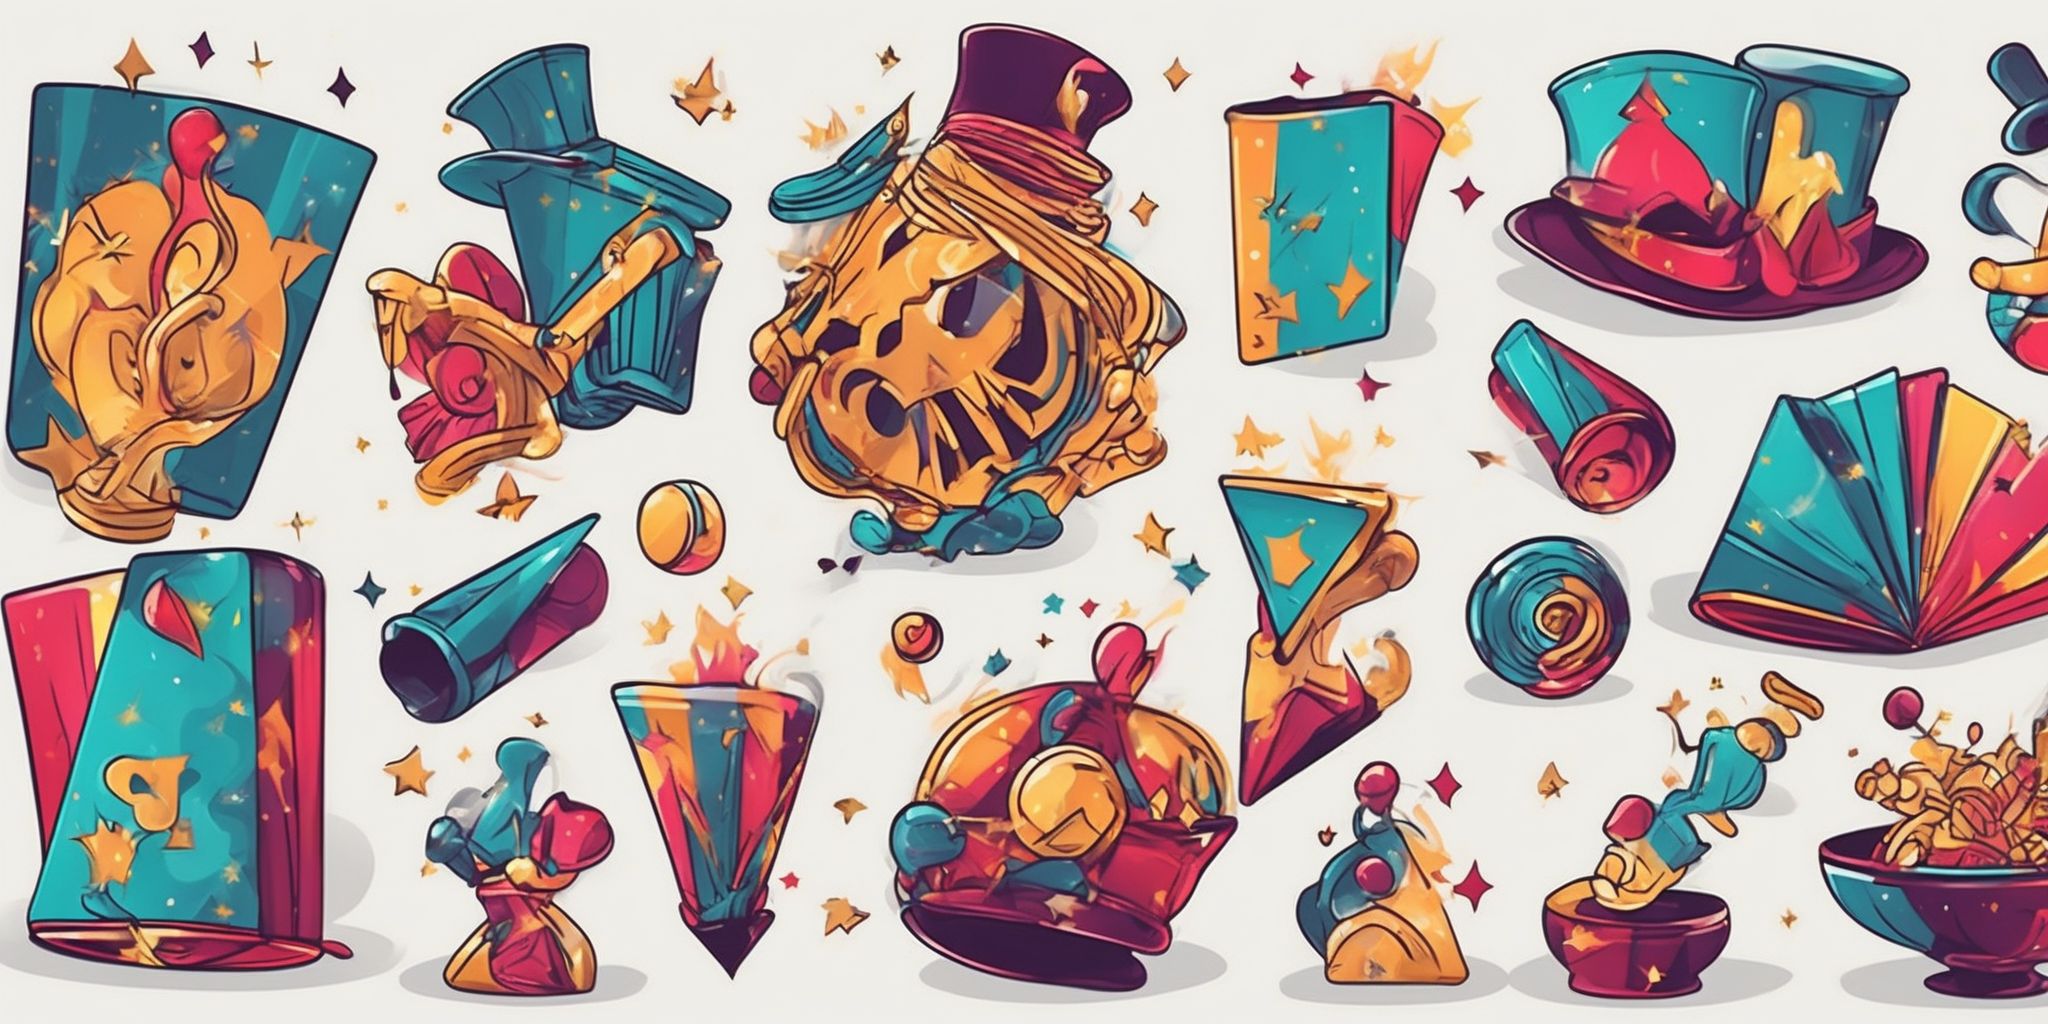 Magic tricks in illustration style with gradients and white background